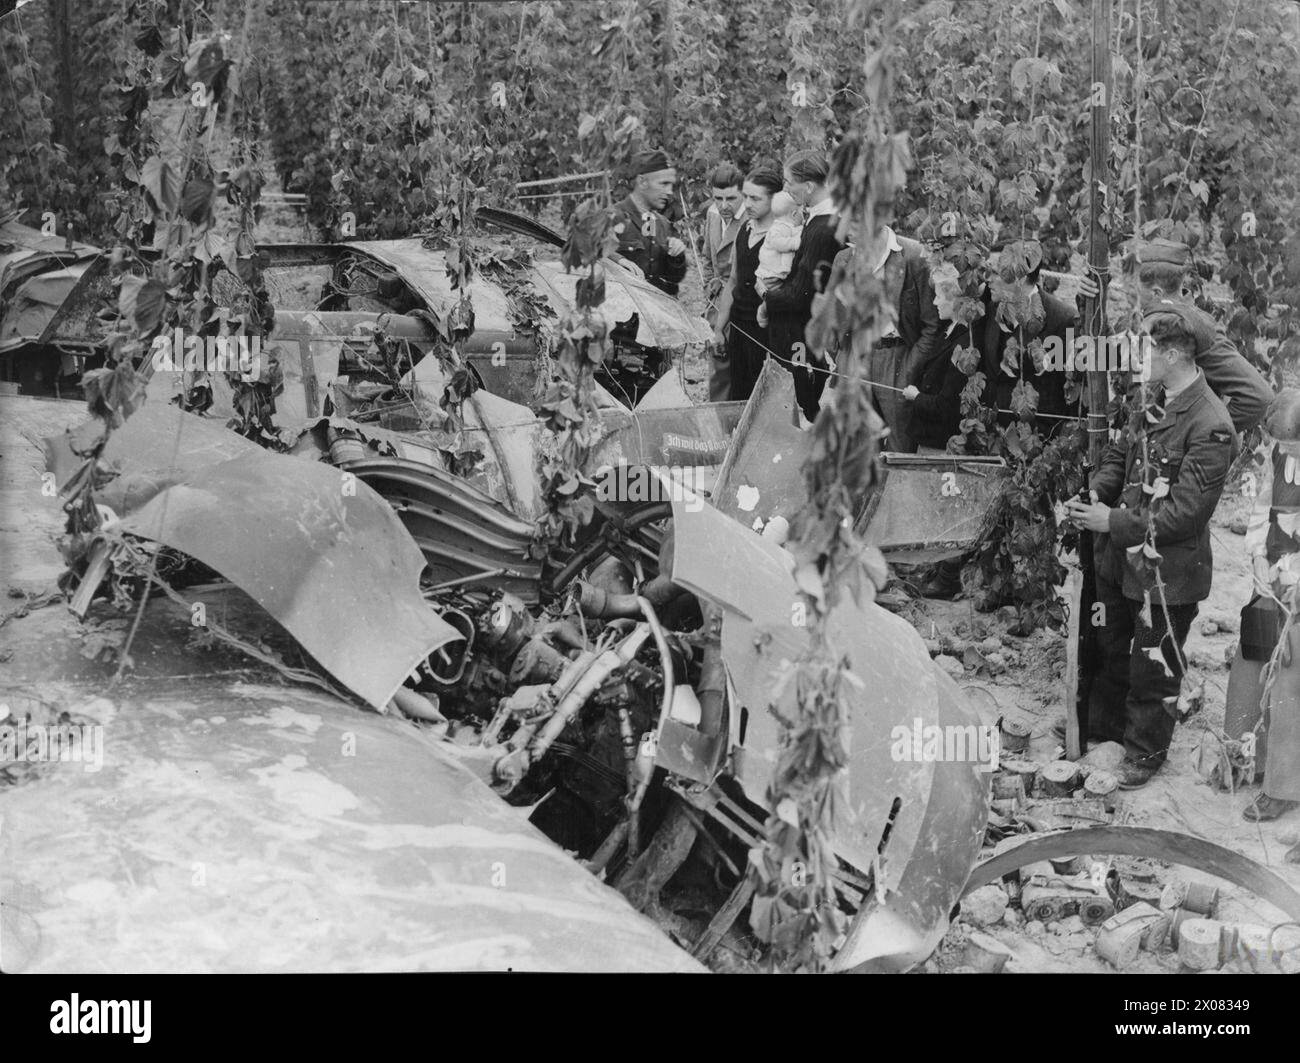 THE BATTLE OF BRITAIN 1940 - Civilians and RAF personnel with a Dornier Do 17 that crash-landed among hops in Kent, July 1940 Stock Photo